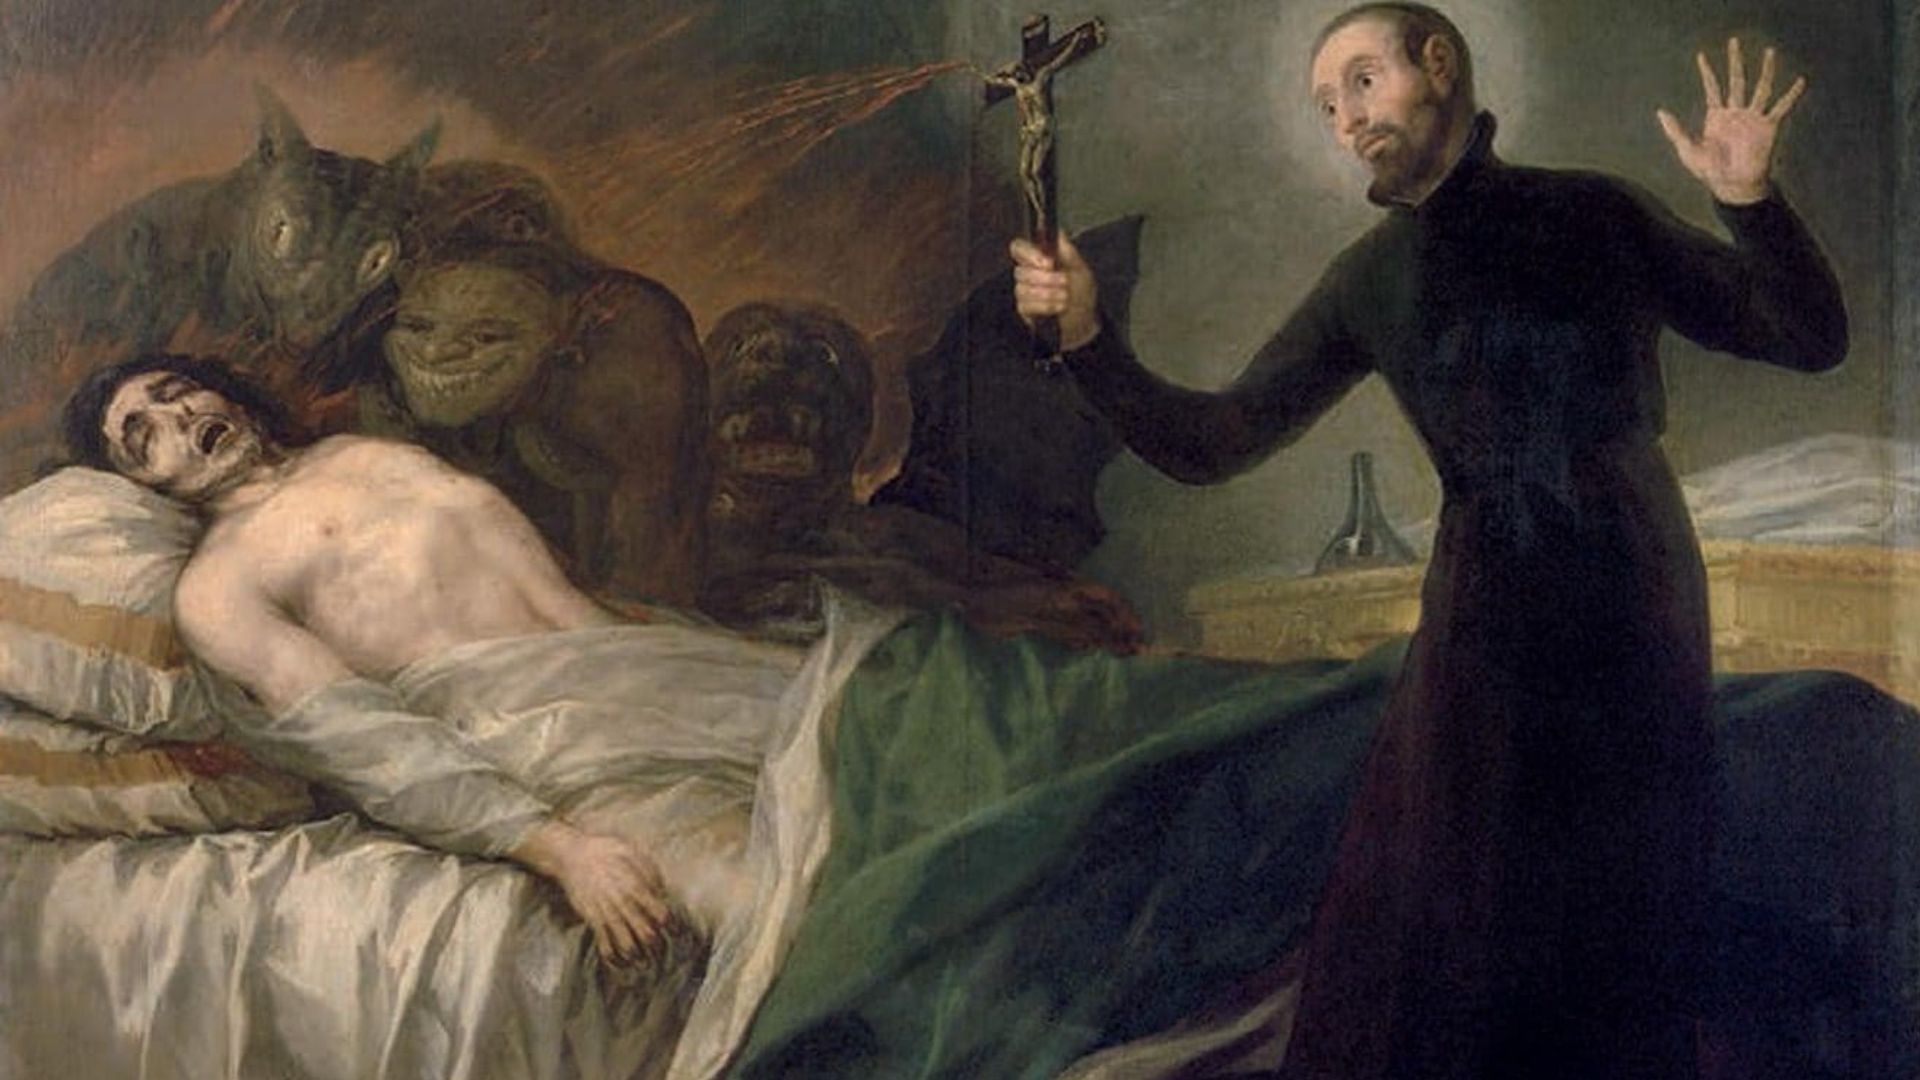 Priest With Cross And A Dead Body On bed